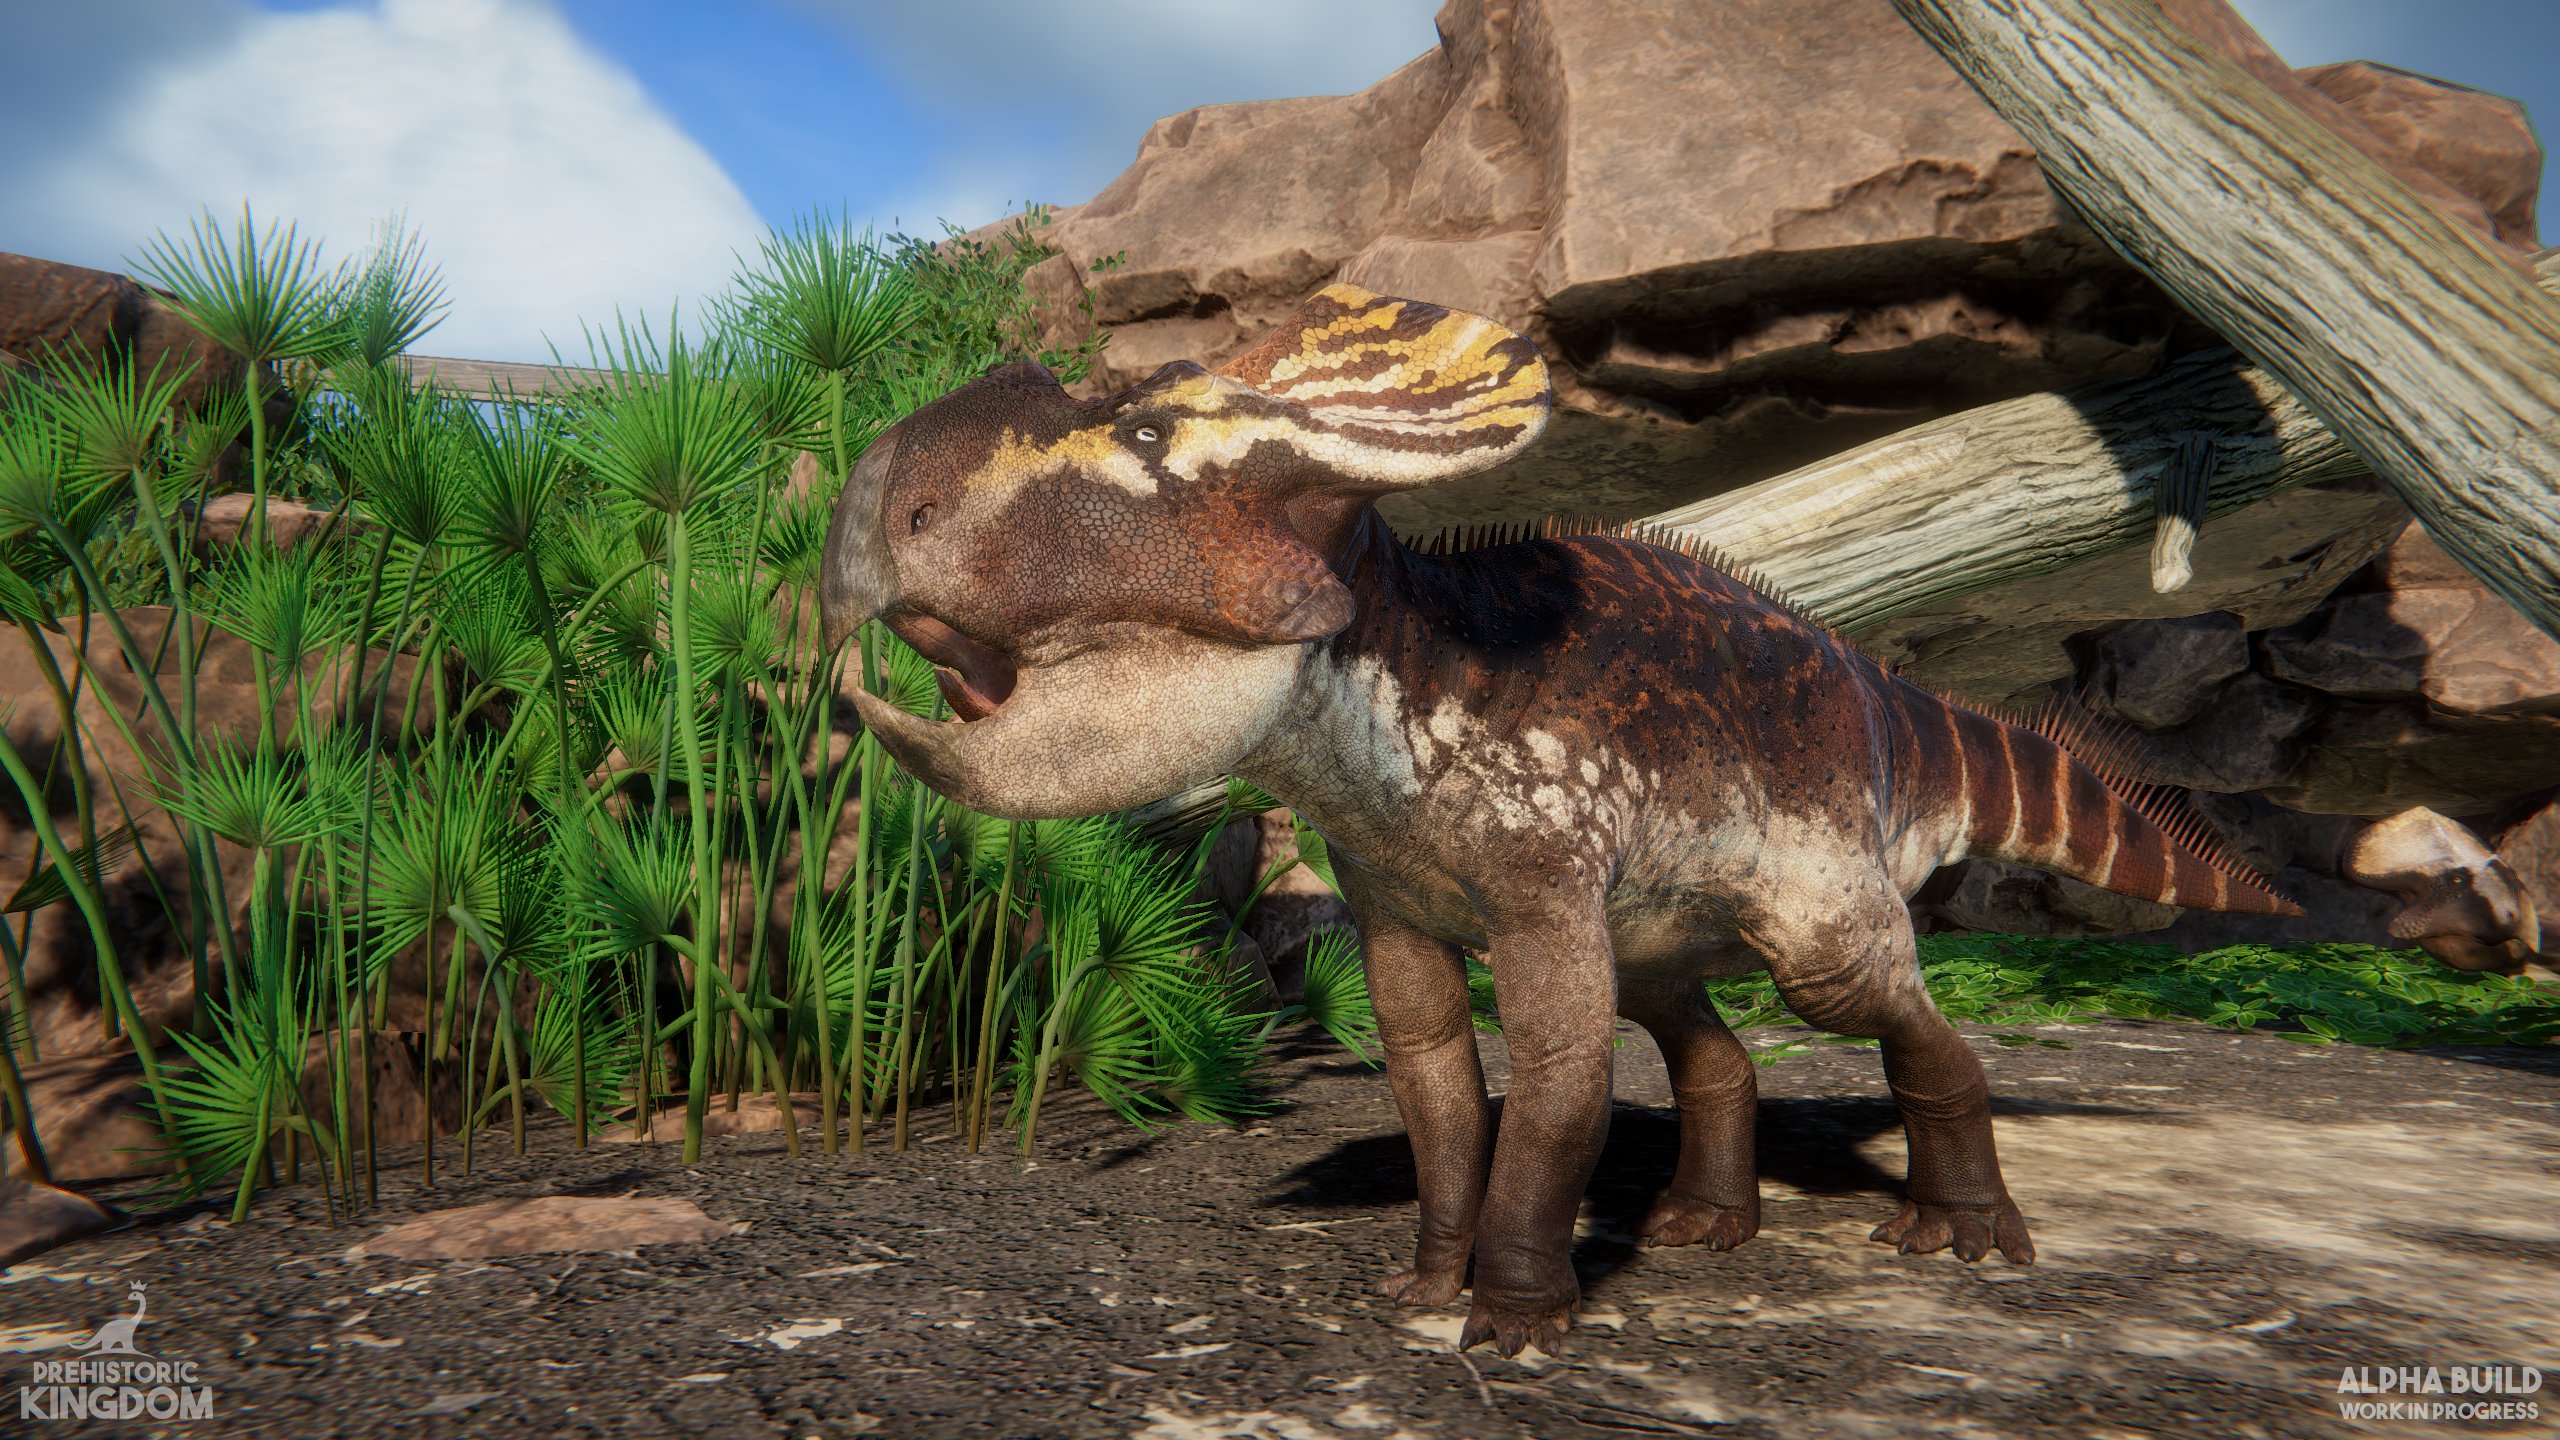 Prehistoric Kingdom is one of the smallest animals in Prehistoric Kingdom! Around the size of a sheep, this creature lacks most of the complex facial features found in other